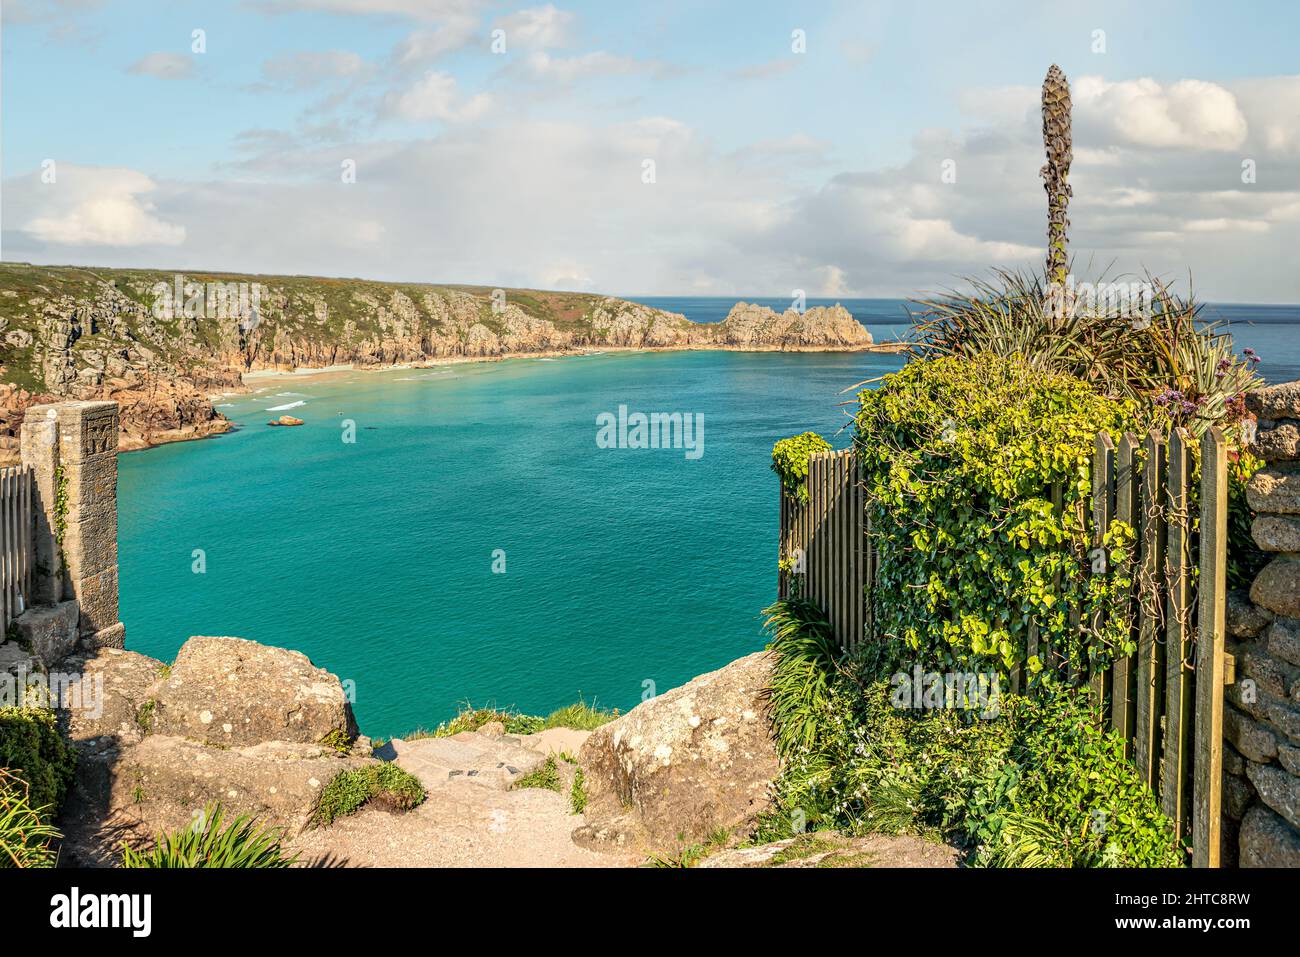 Garden of Minack Theatre à Porthcurno, Cornwall, Angleterre, Royaume-Uni Banque D'Images